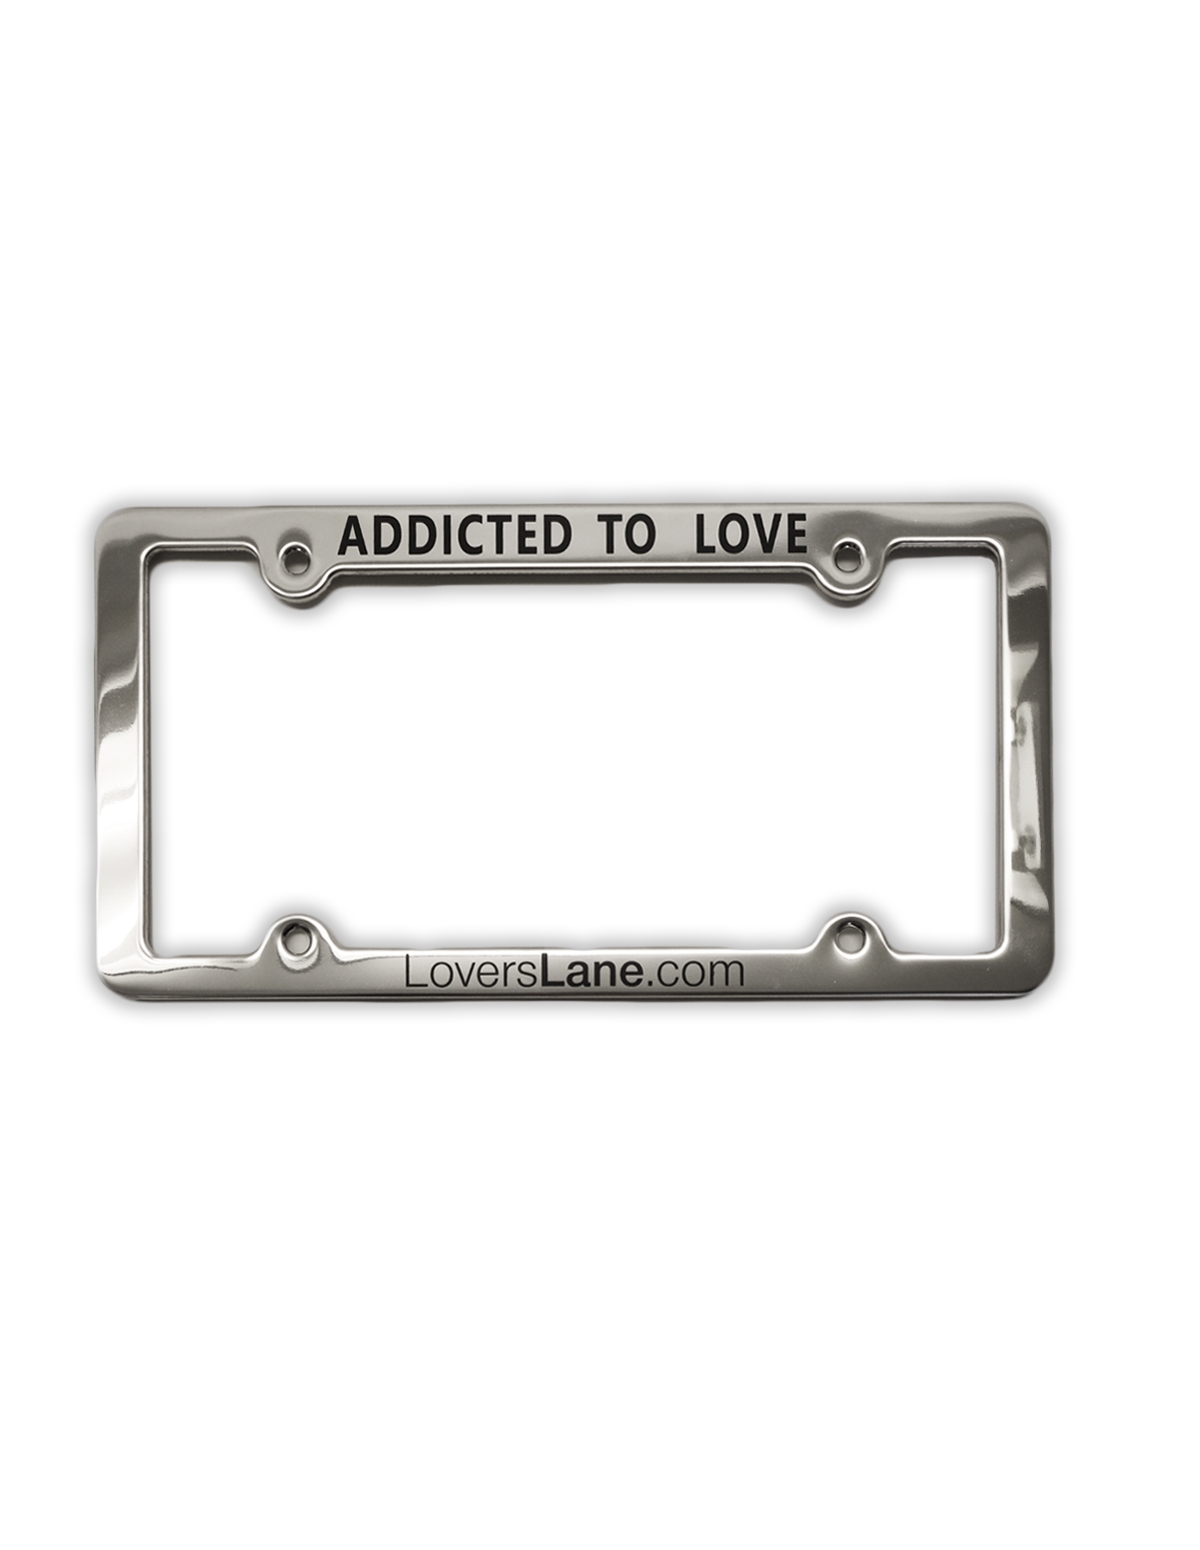 alternate image for License Plate Cover - Addicted To Love